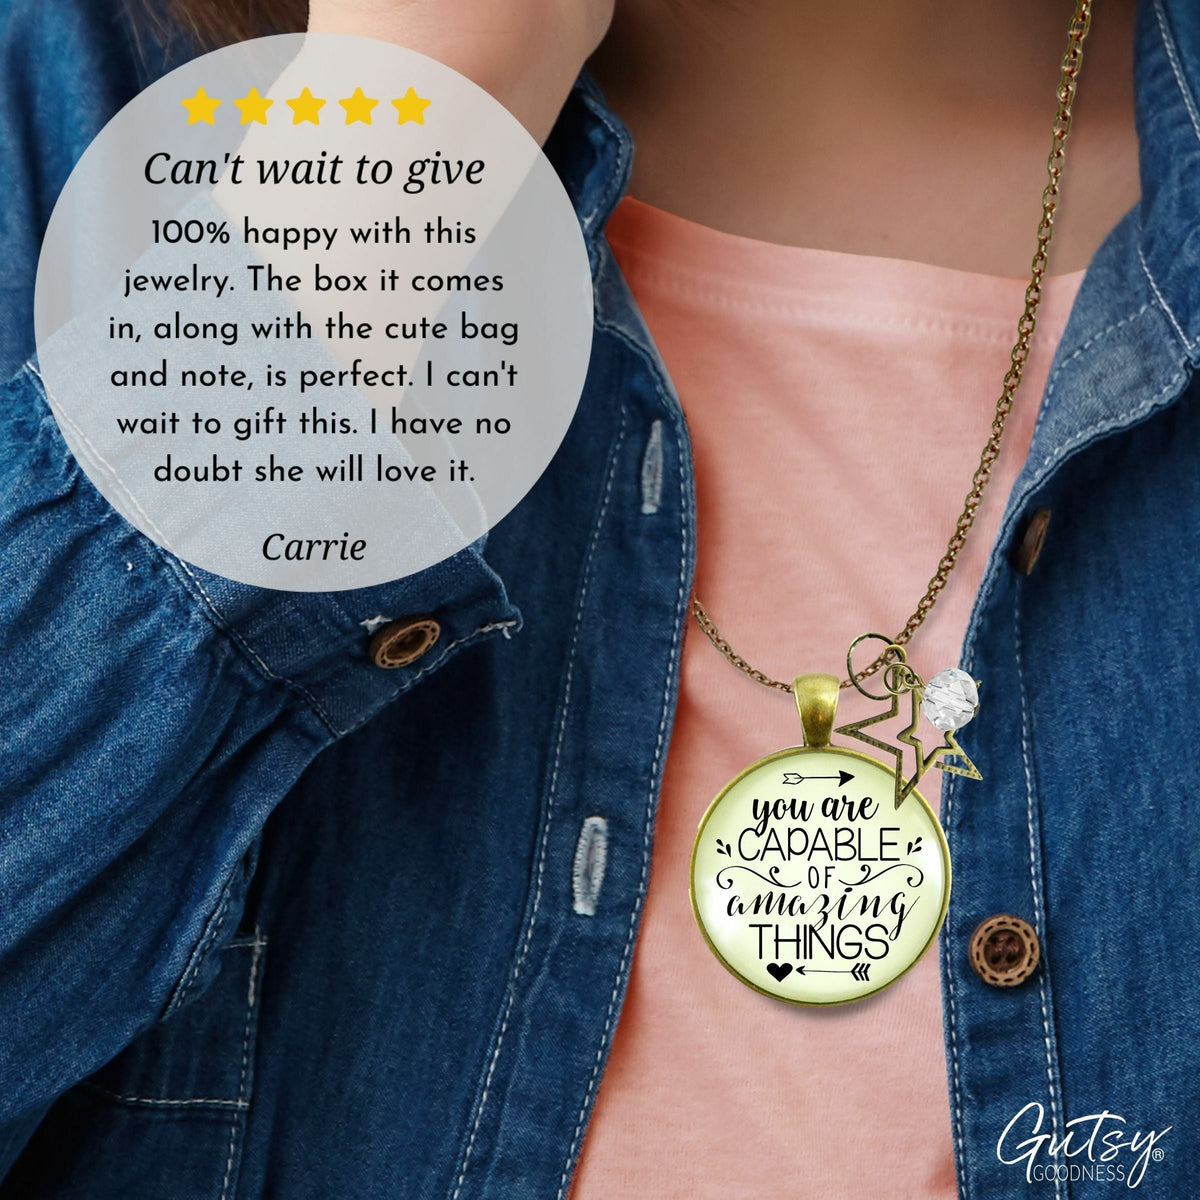 Gutsy Goodness Survivor Necklace Yes I Am Tired But a Warrior Strong Ribbon Jewelry - Gutsy Goodness Handmade Jewelry;Survivor Necklace Yes I Am Tired But A Warrior Strong Ribbon Jewelry - Gutsy Goodness Handmade Jewelry Gifts